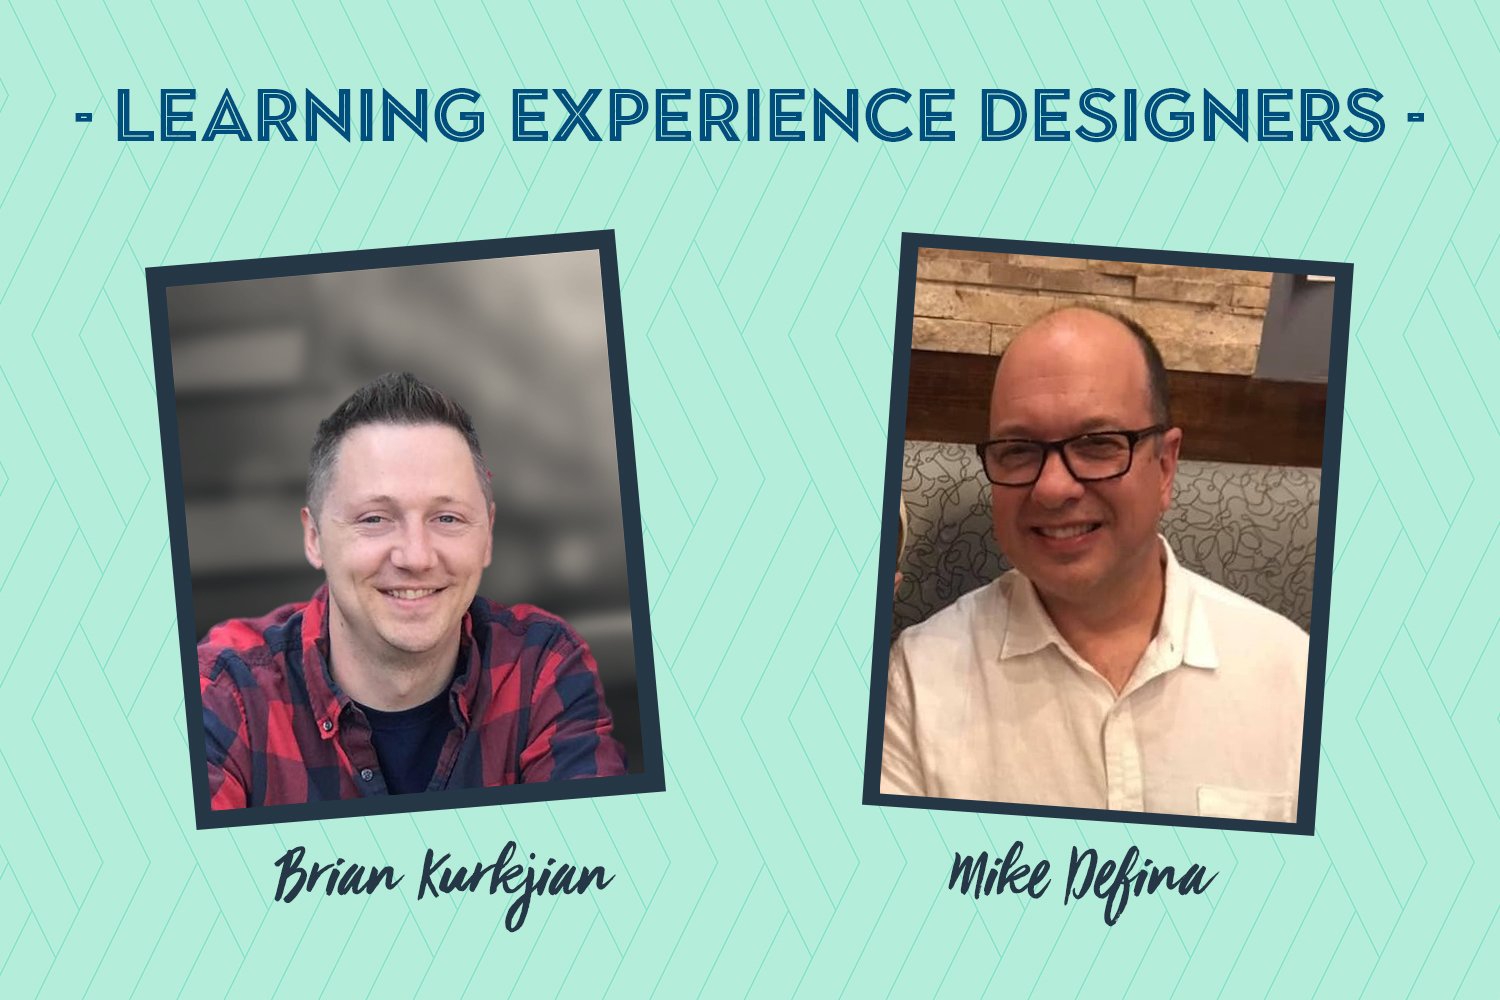 BBC Training team expands with learning experience designers